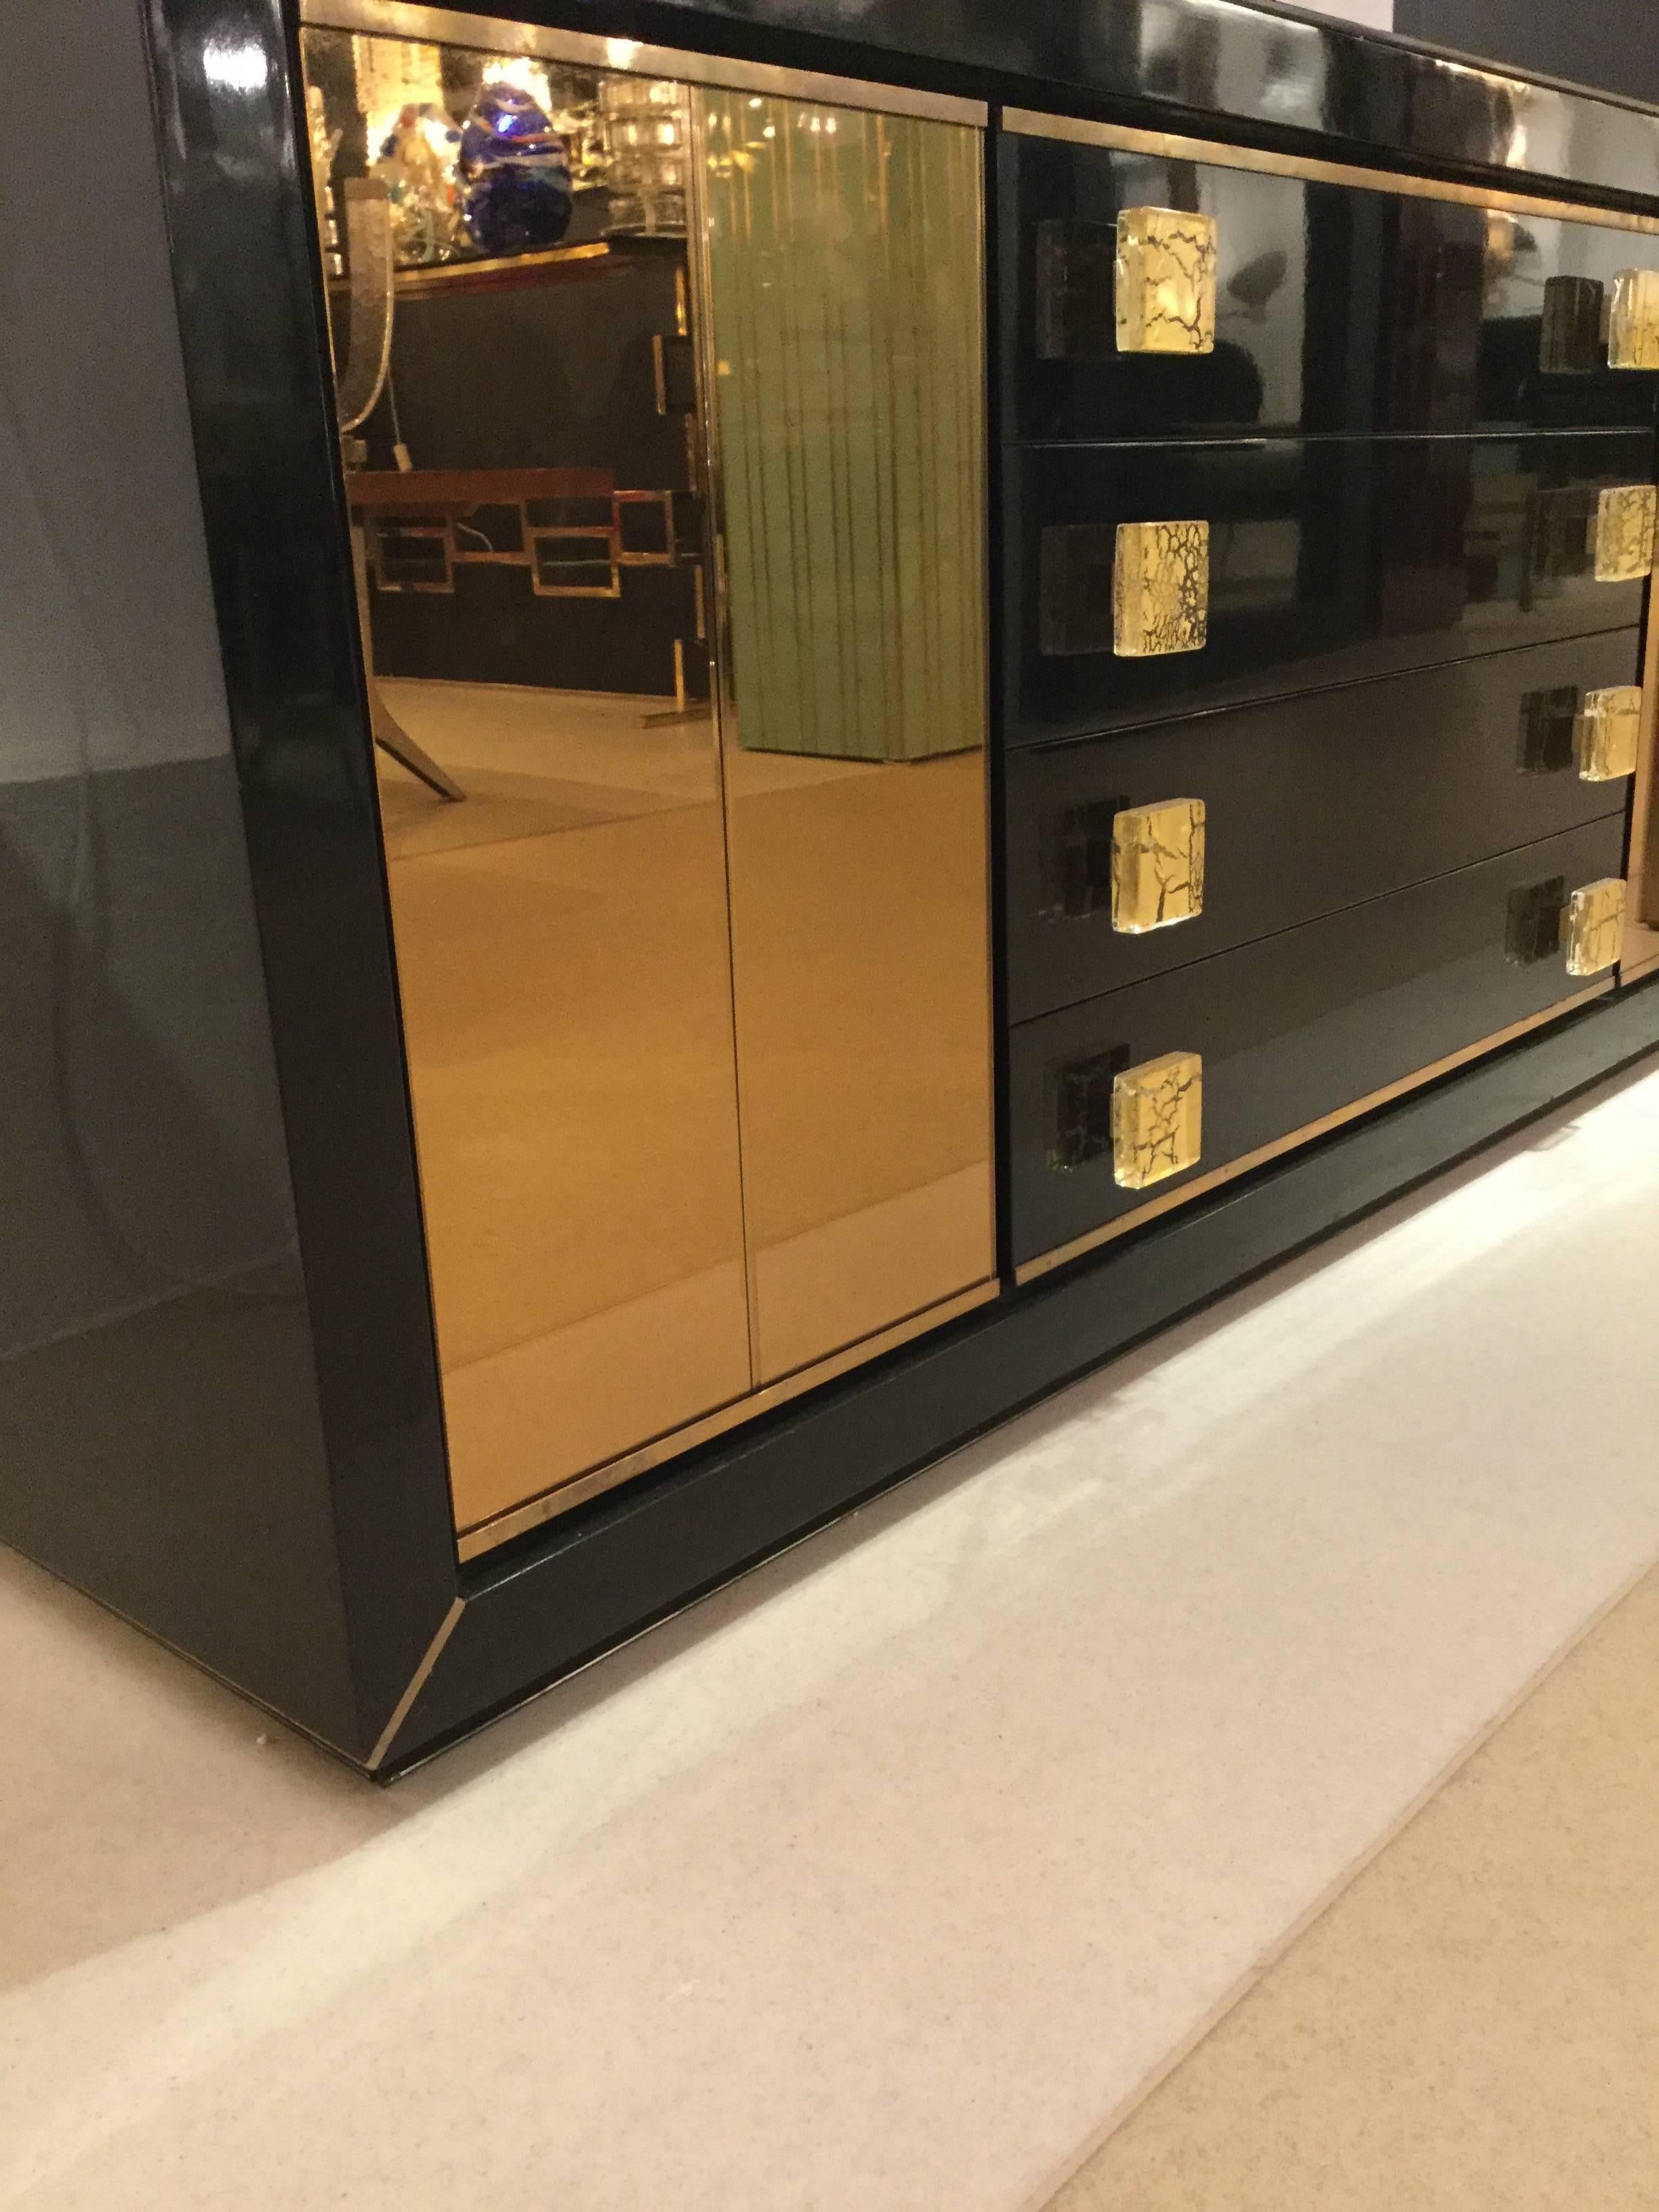 A 1960s Italian designed sideboard, black lacquer with brass profiling, two glass door panels and four drawers with Murano glass door handles.